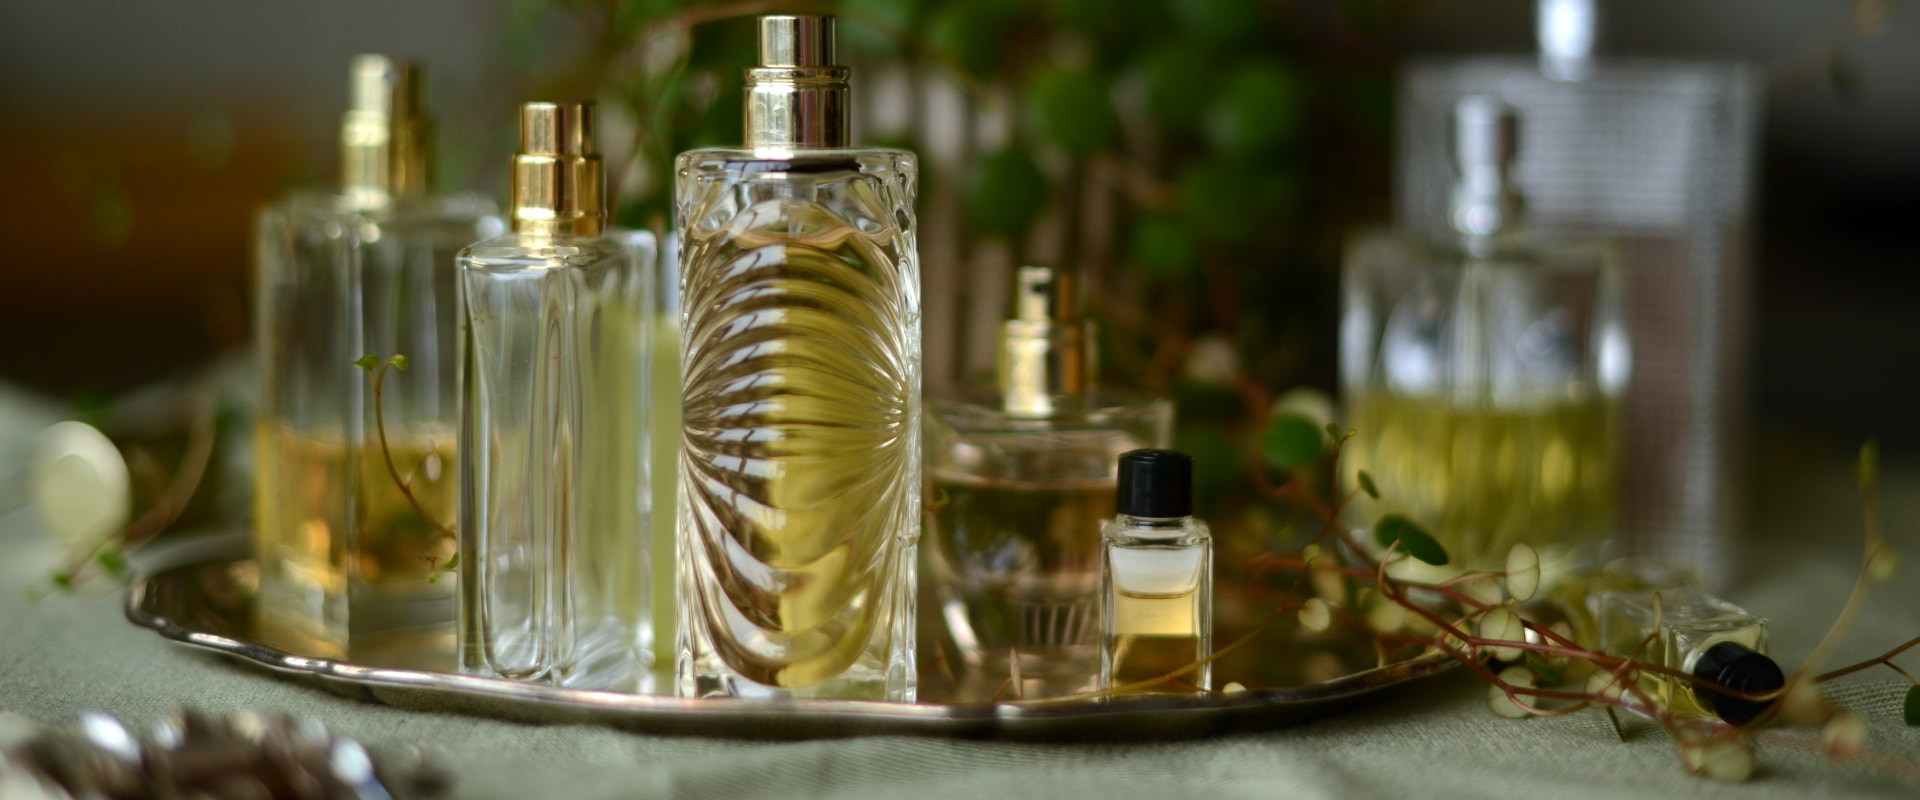 Tips for Accurately Testing Perfumes on Different Occasions